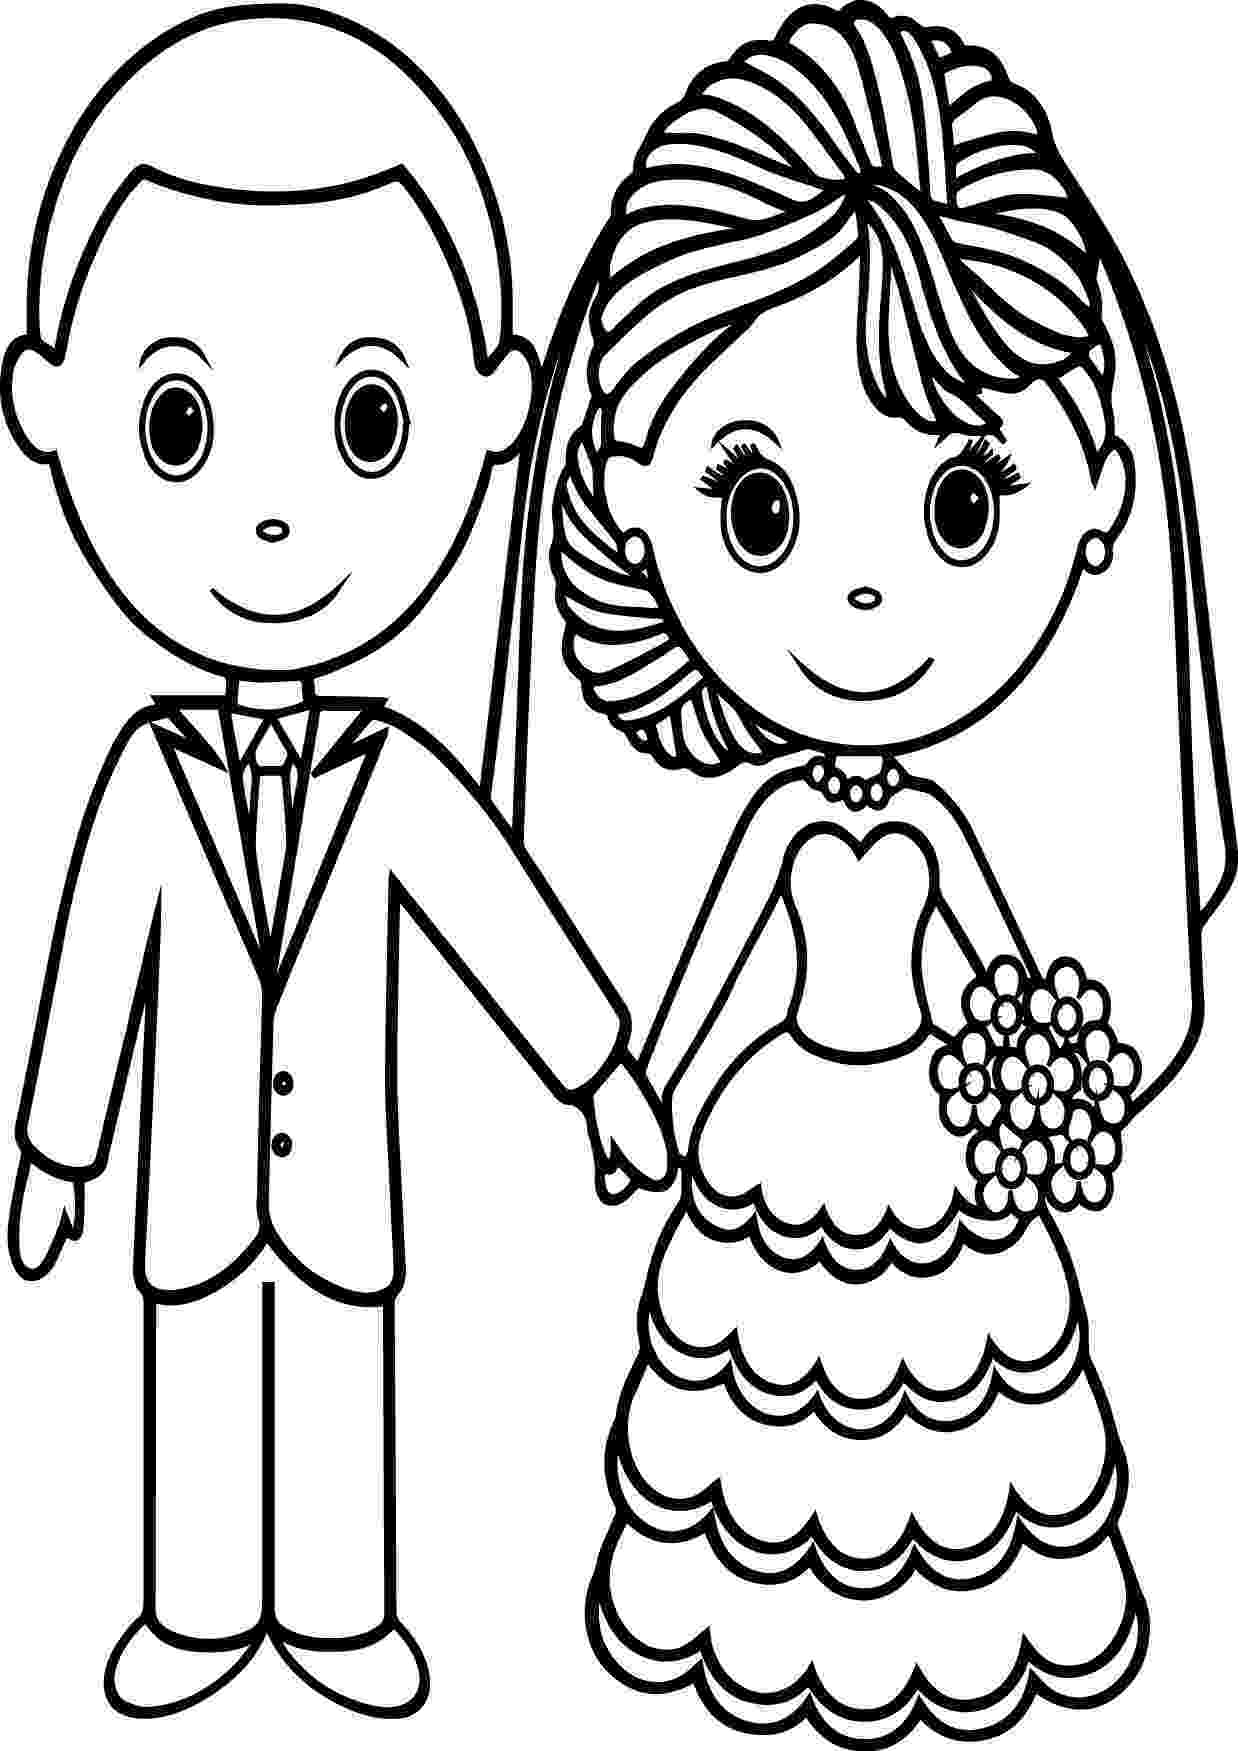 bride coloring page coloring now blog archive wedding coloring pages bride coloring page 